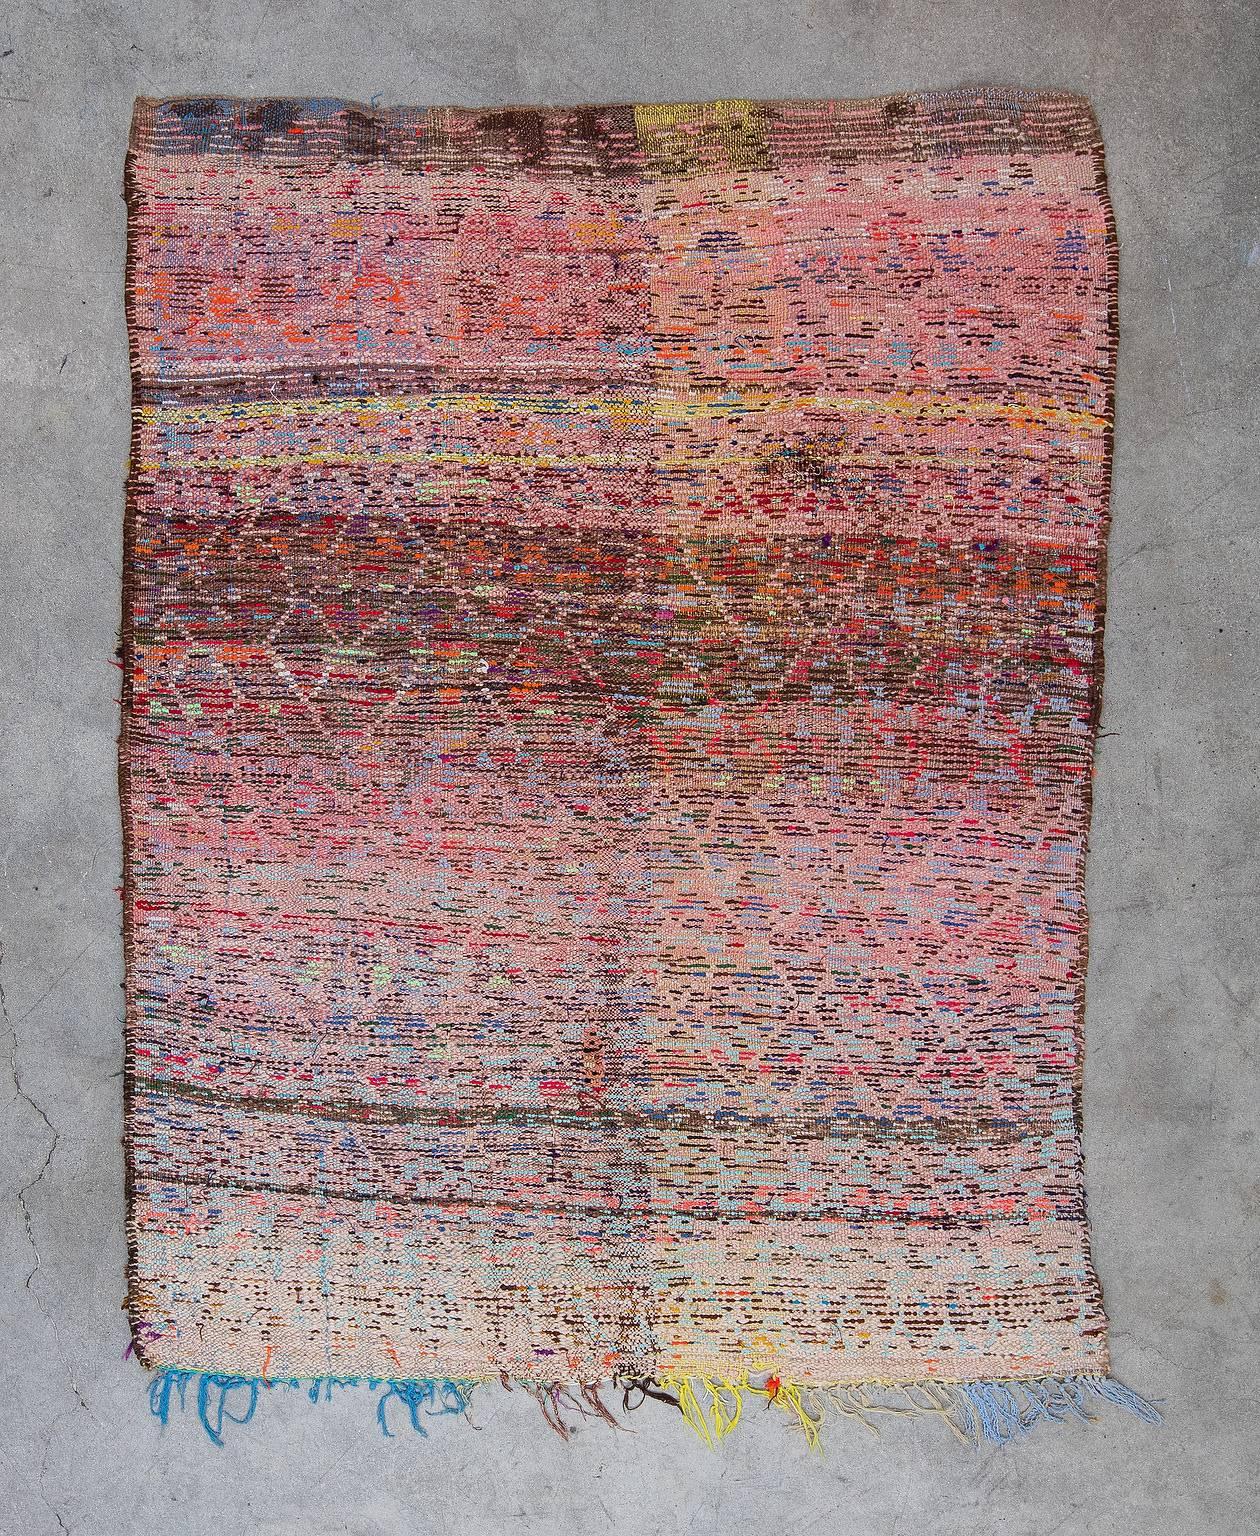 Moroccan Boucherouite rugs are woven by Berber tribal women for domestic use in the home. The word Boucherouite stems from the Arabic bu sherwit meaning “a scrap from used clothing”. Indeed these whimsical works of art are made from recycled cloth